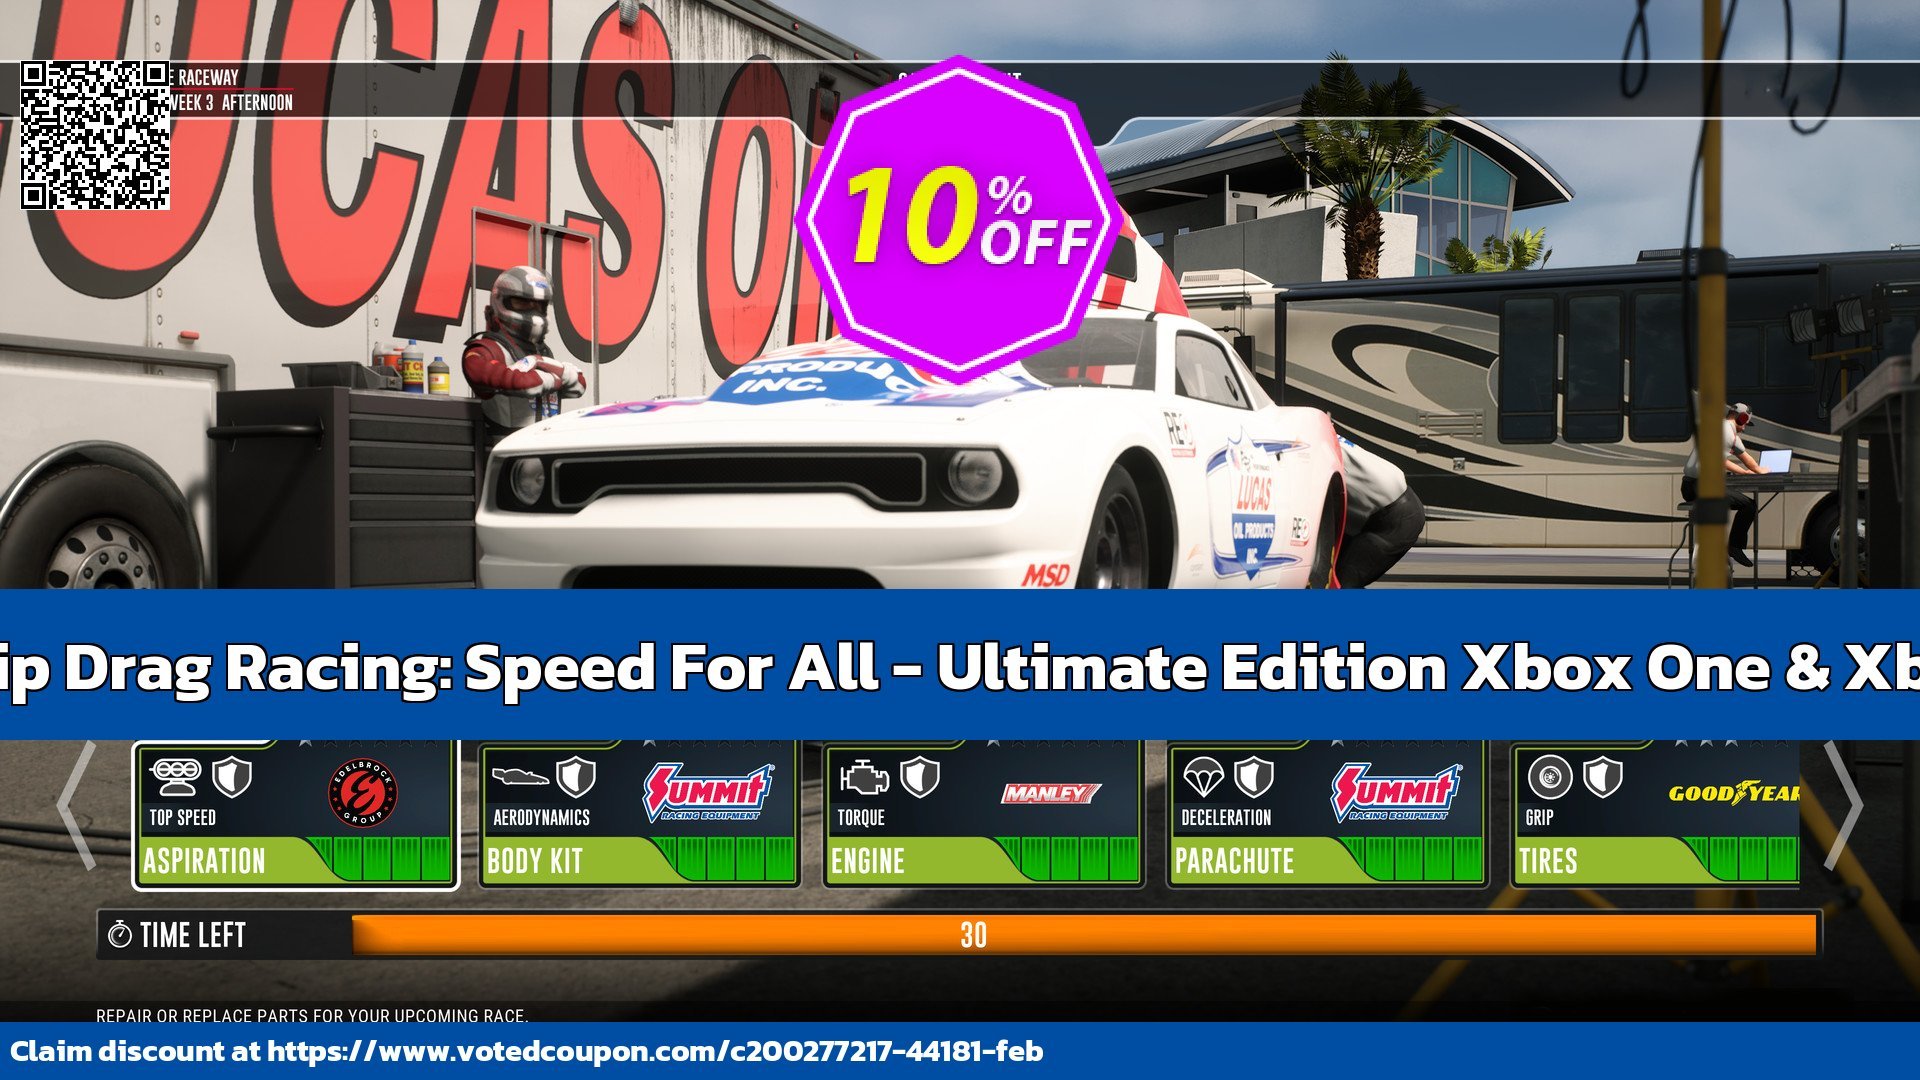 NHRA Championship Drag Racing: Speed For All - Ultimate Edition Xbox One & Xbox Series X|S, WW  voted-on promotion codes